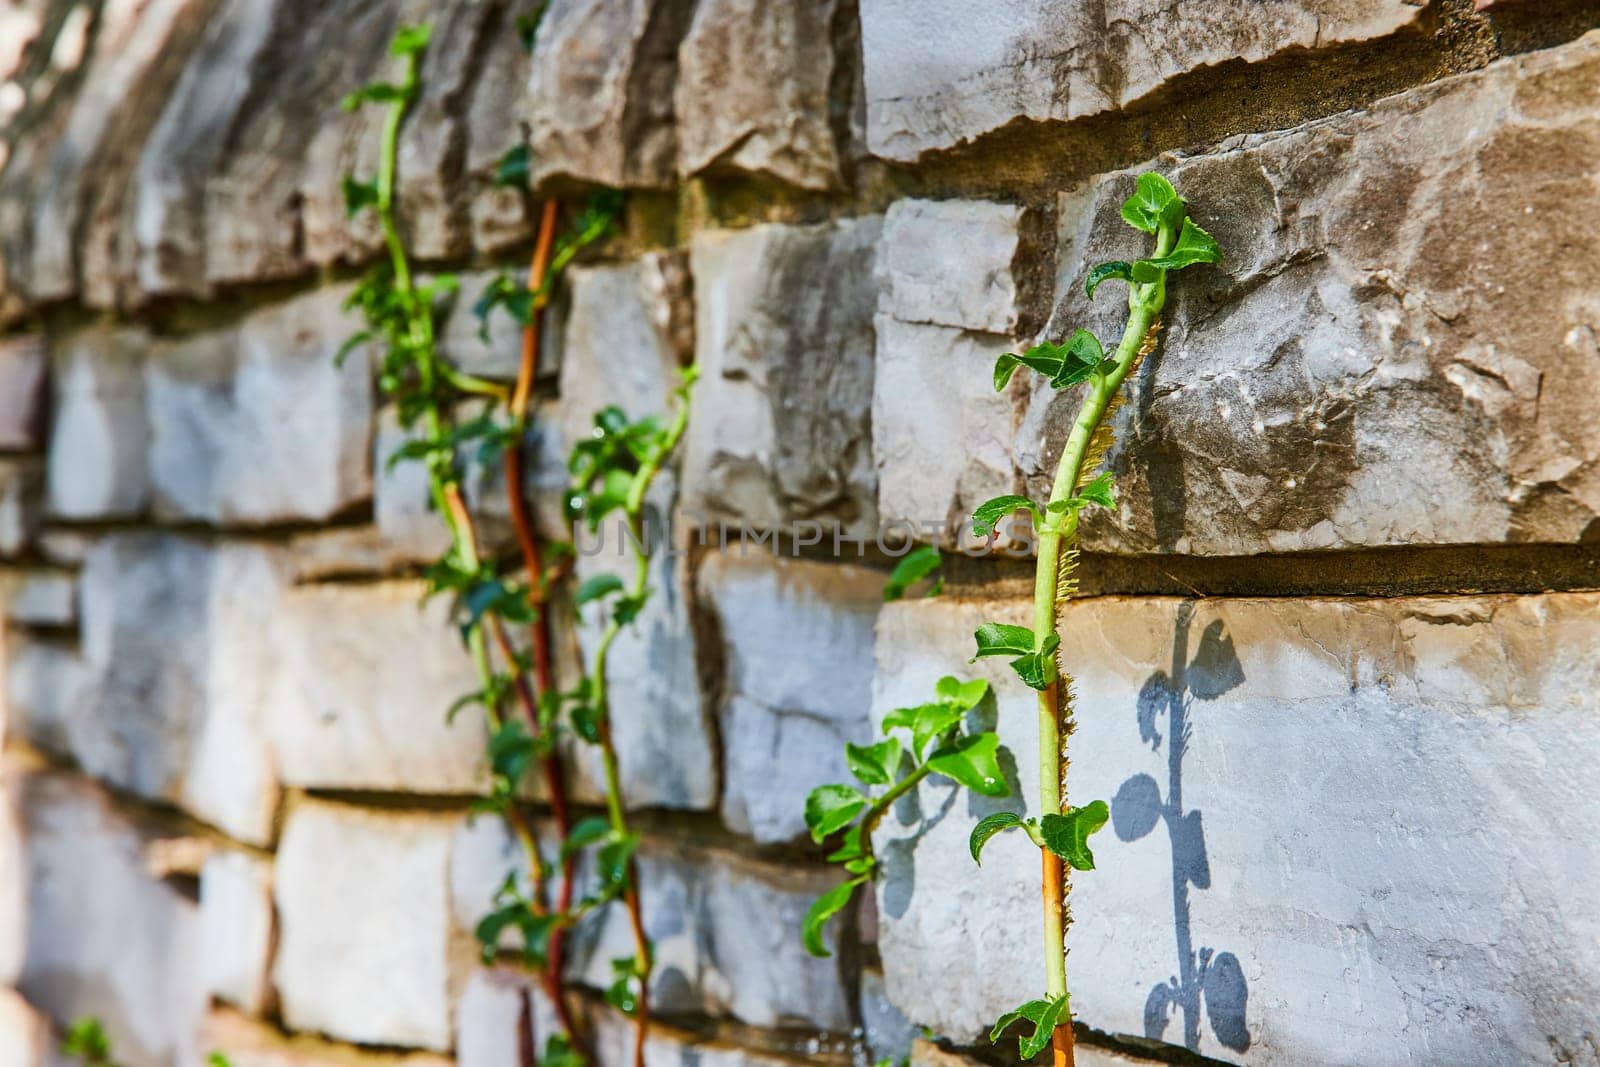 Vine on Textured Brick Wall - Nature Meets Architecture by njproductions